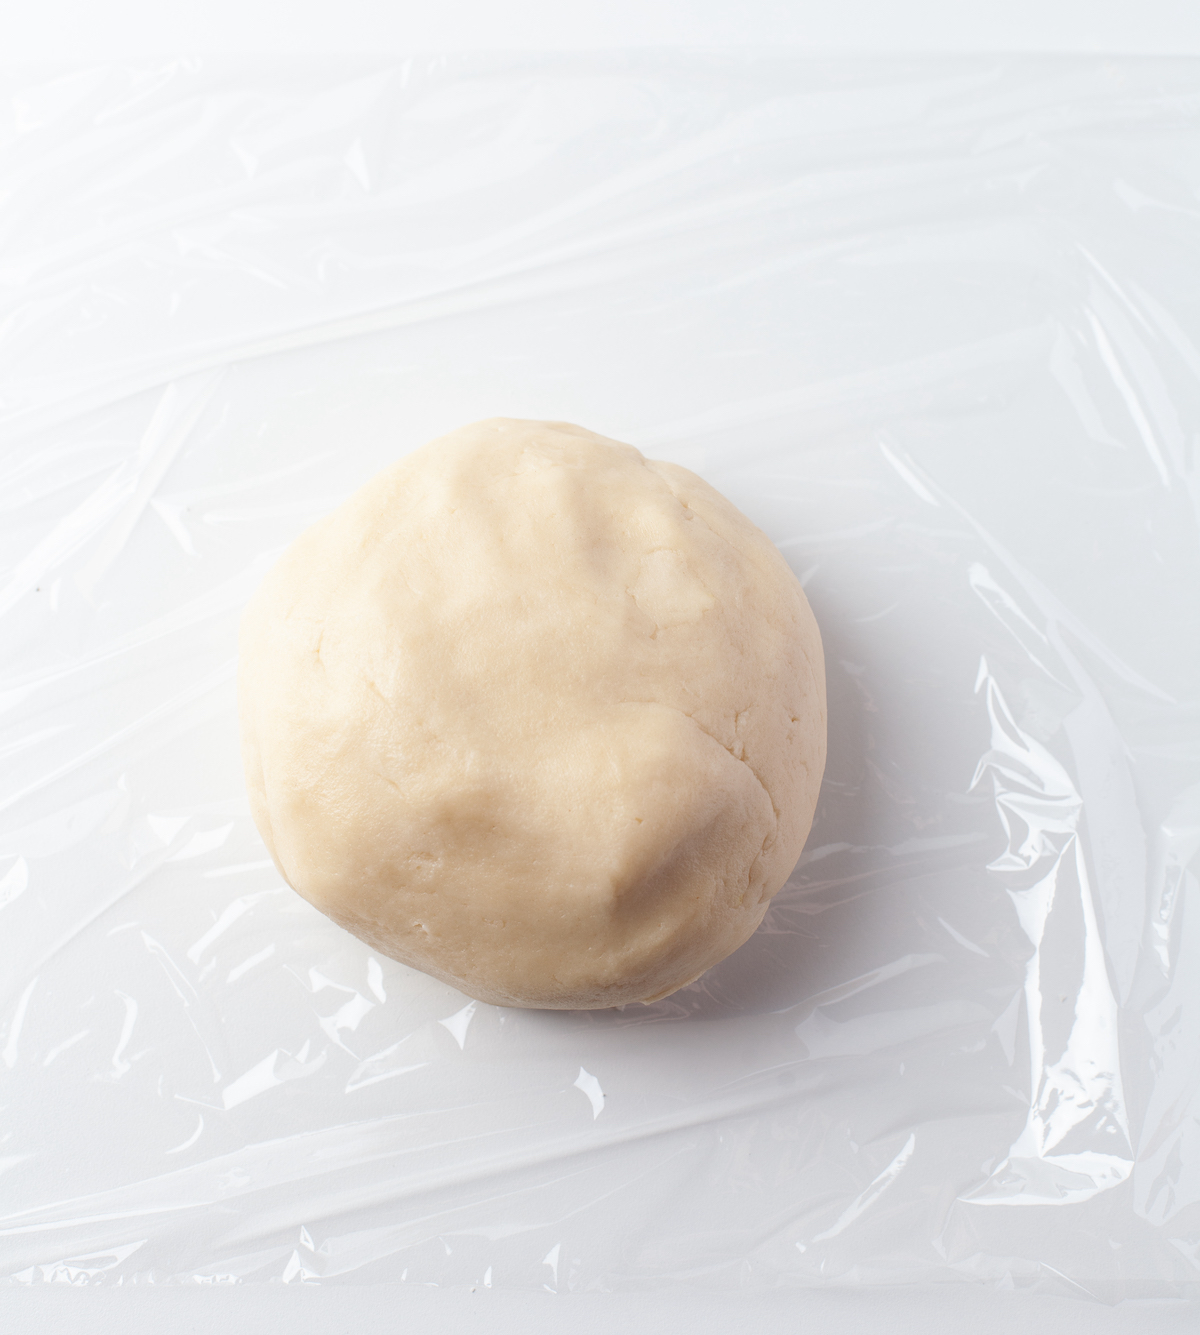 Dough being wrapped in plastic wrap to go into the fridge